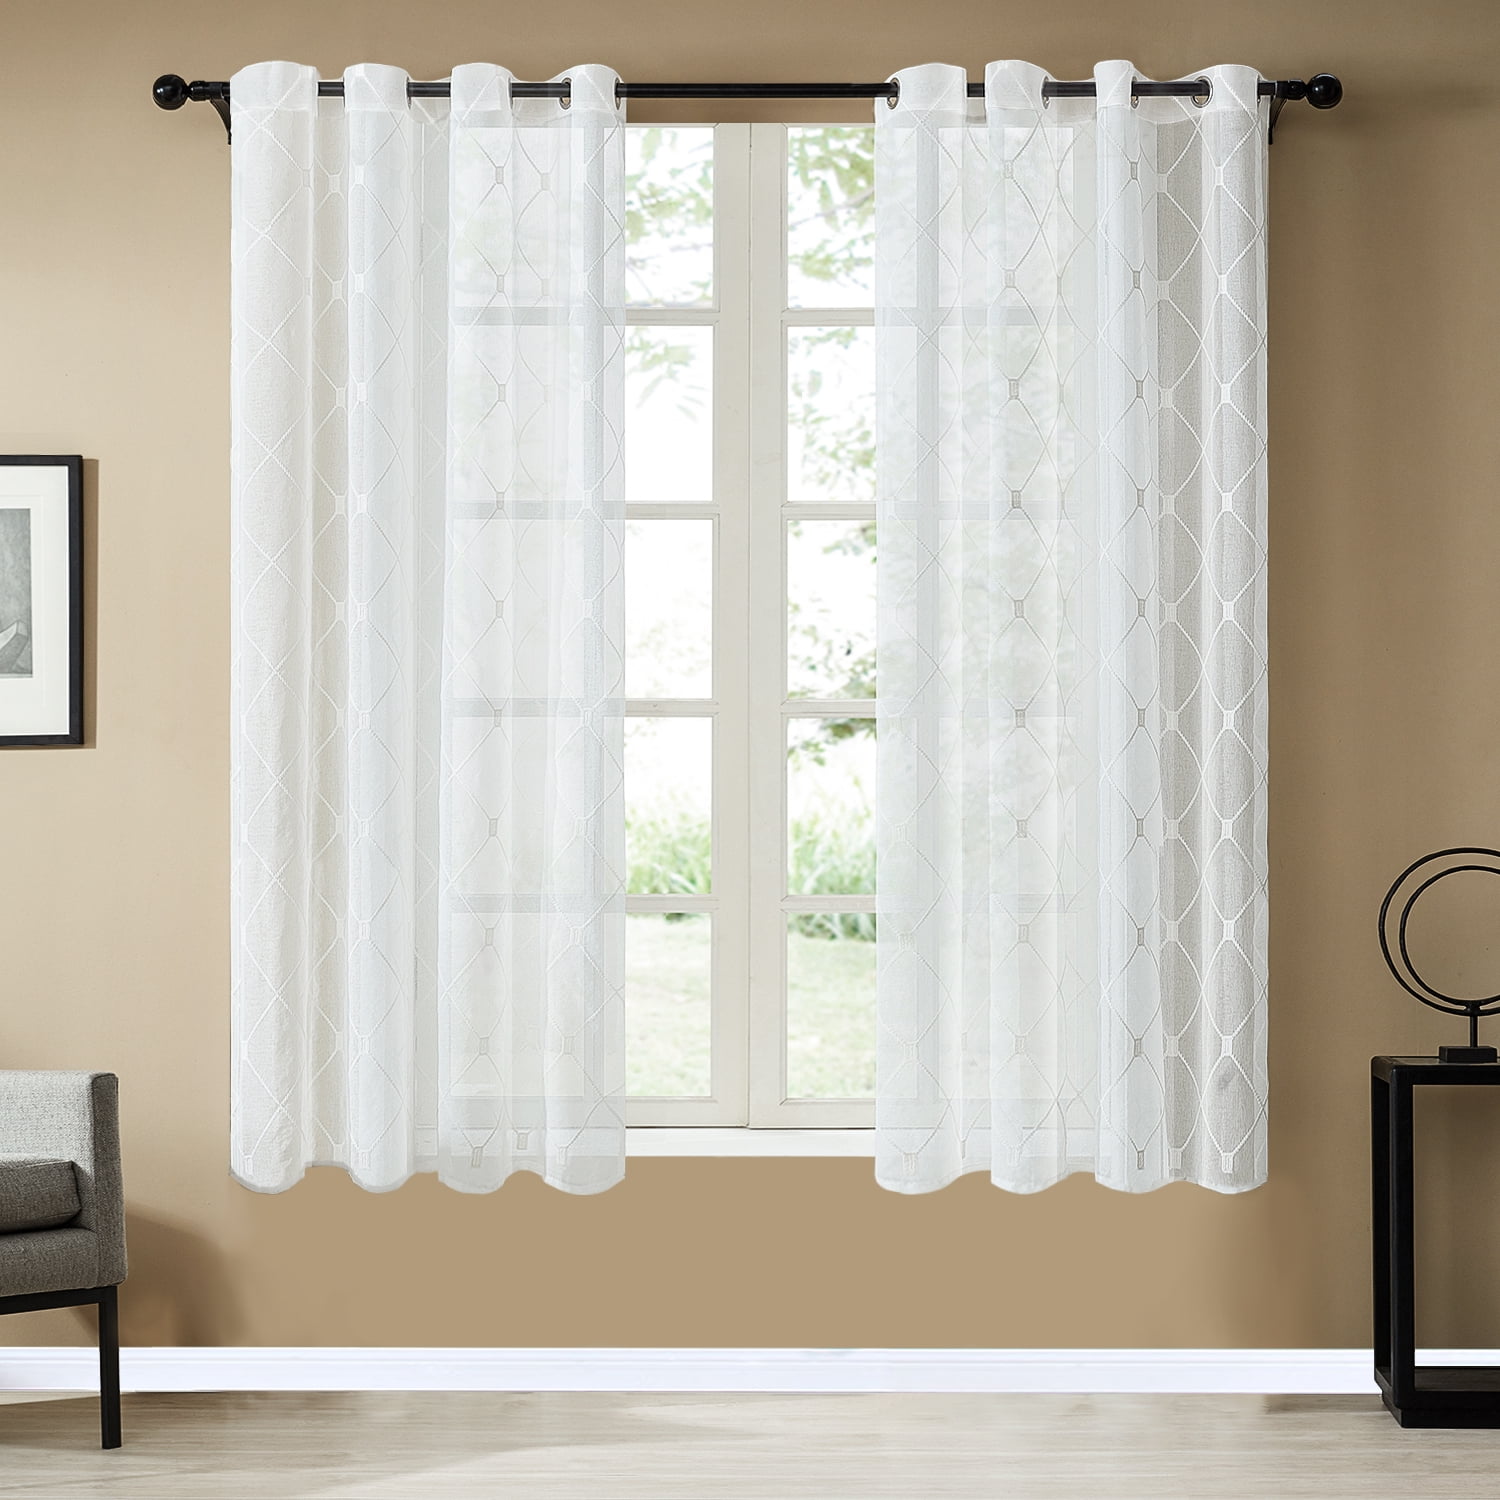 Topfinel White Sheer Curtains 63 Inch Length Embroidered Diamond Grommet  Window Curtains for Living Room Bedroom, 2 Panels - Walmart.com